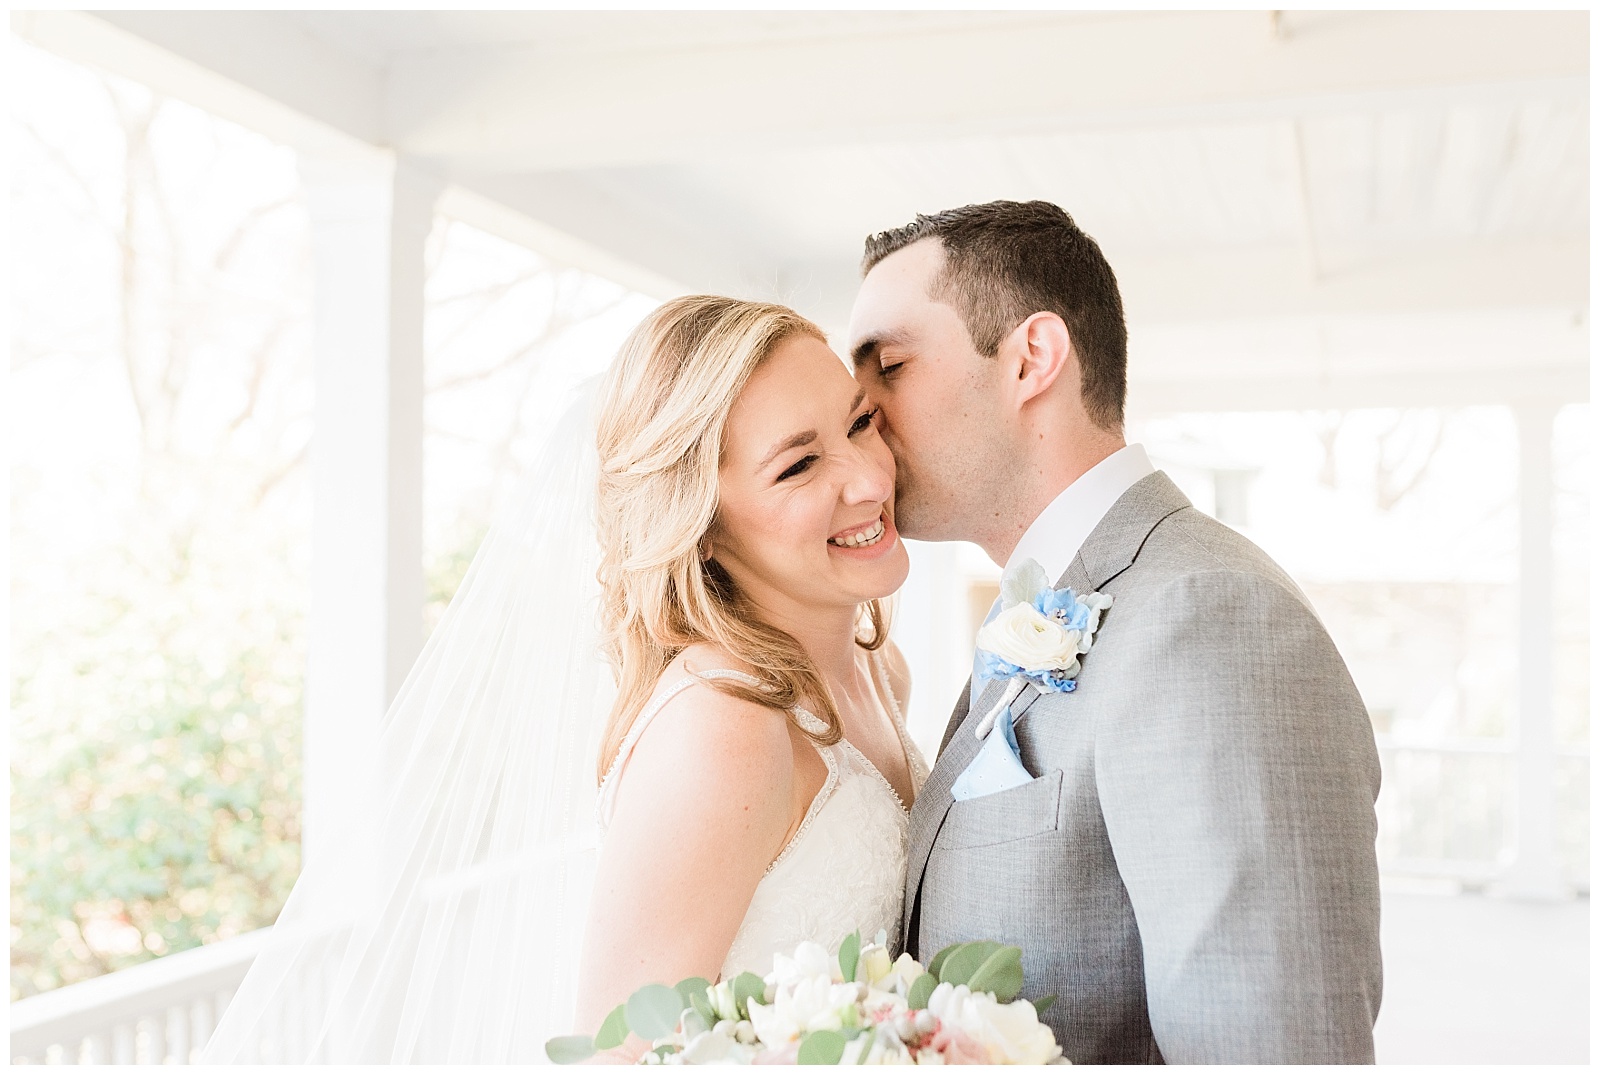 Groom kisses a bride's cheek while she laughs.